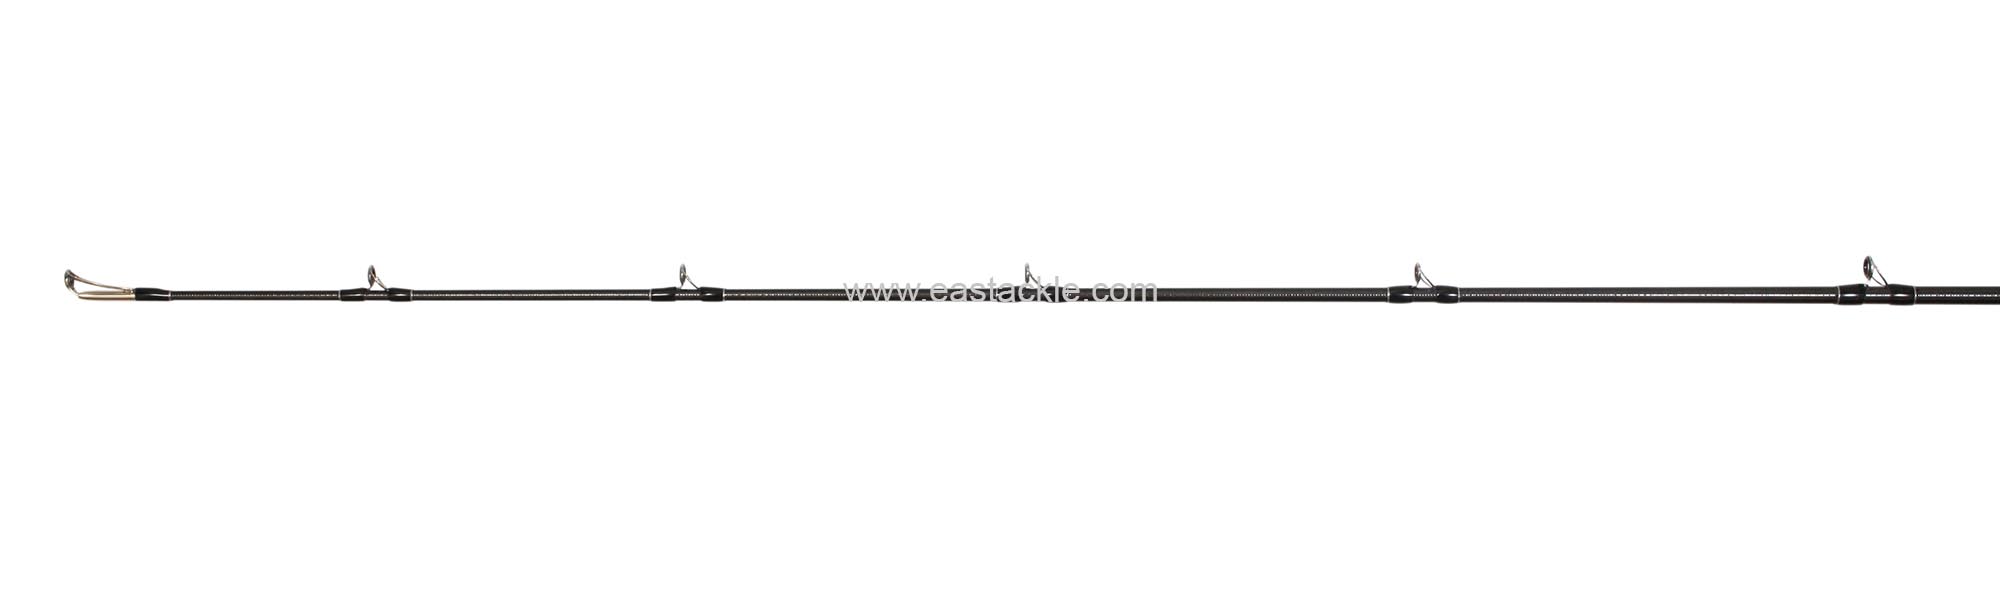 Daiwa - Black Label 701XXHB - Bait Casting Rod - Tip Section (Side View) | Eastackle